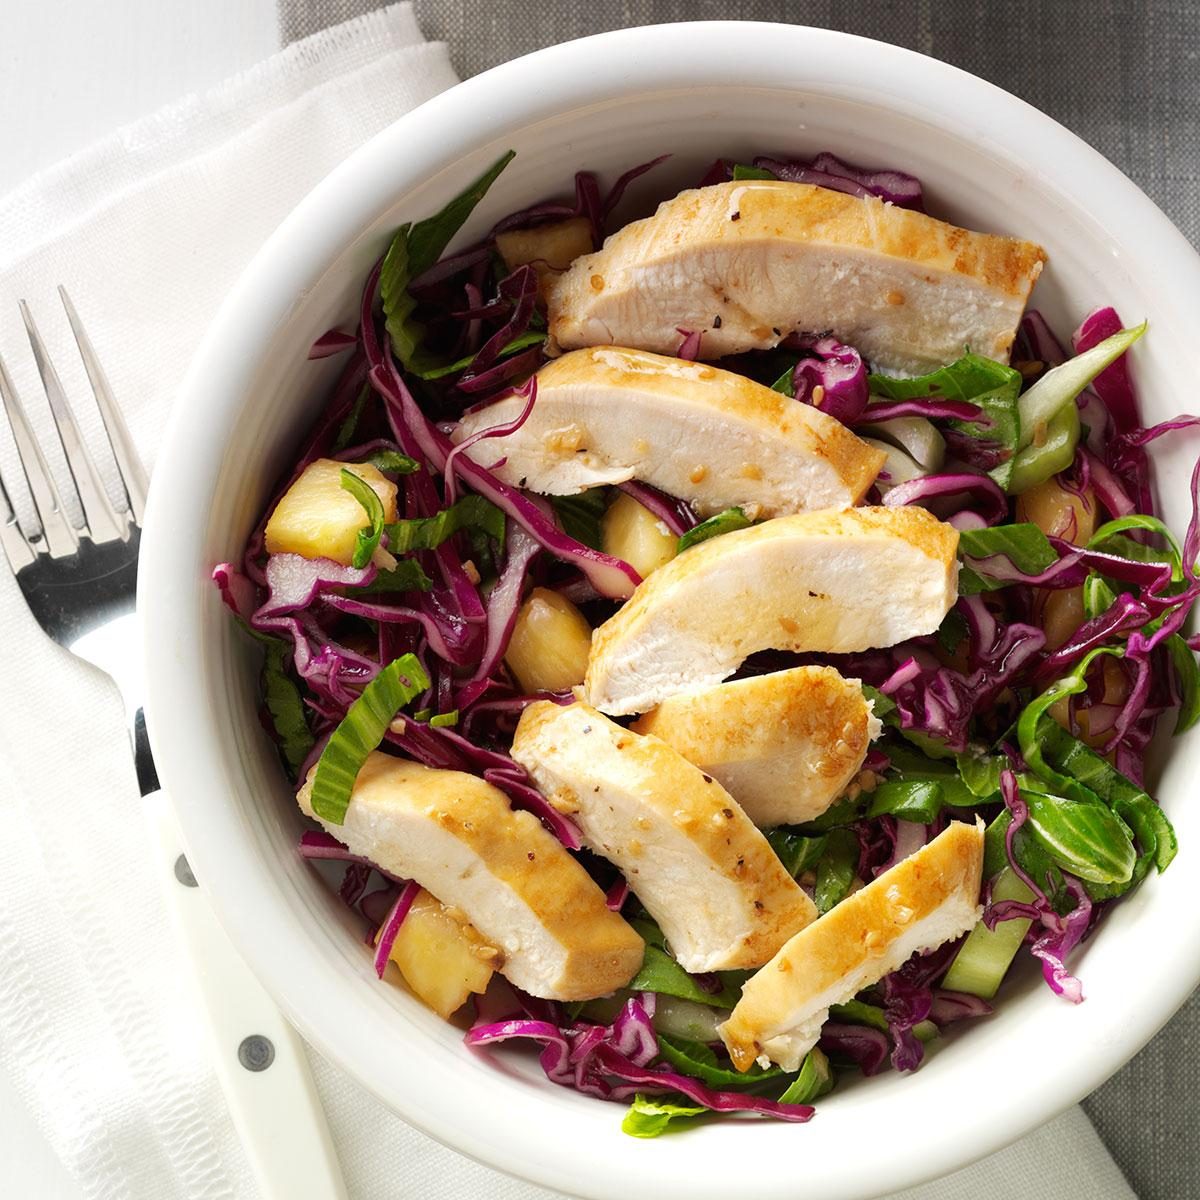 <p>This meal is always a hit, and it goes together so quickly. Sesame ginger salad dressing adds refreshing flavor to this pairing of broiled chicken and an exotic homemade coleslaw. —Melissa Jelinek, Apple Valley, Minnesota</p> <div class="listicle-page__buttons"> <div class="listicle-page__cta-button"><a href='https://www.tasteofhome.com/recipes/chicken-and-asian-slaw/'>Go to Recipe</a></div> </div>